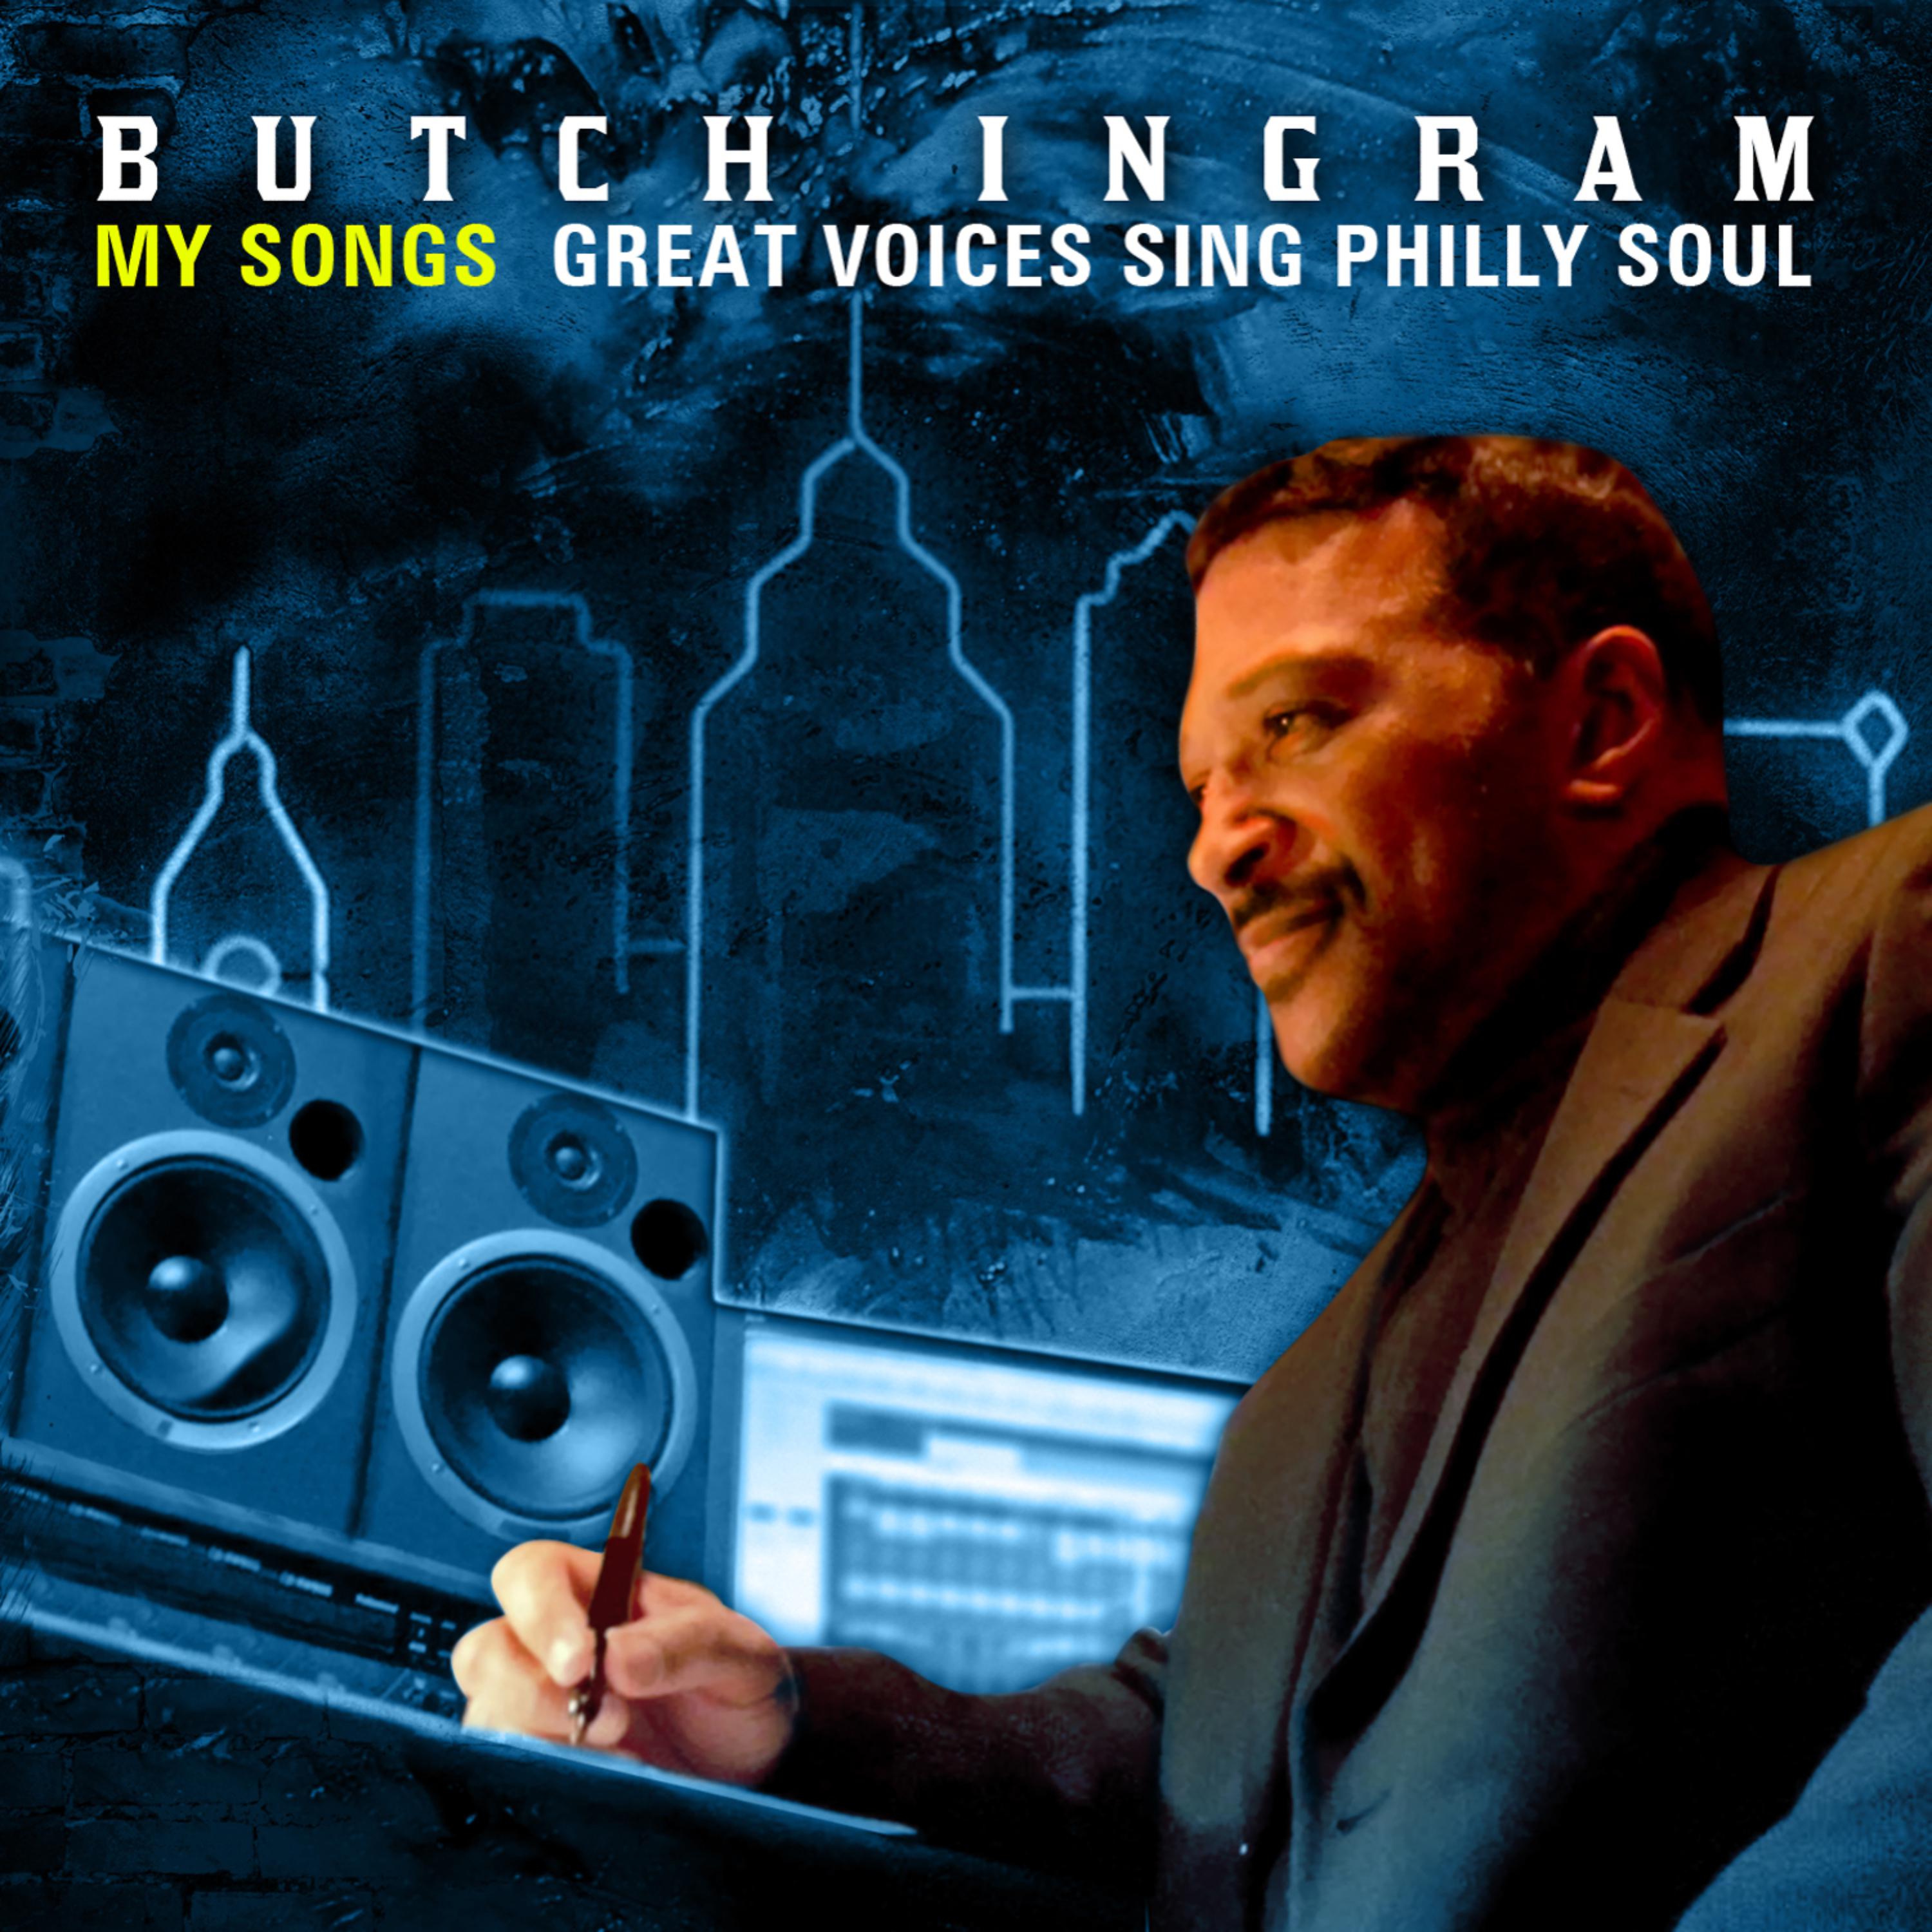 Постер альбома Butch Ingram "My Songs" - Great Voices Sing Philly Soul